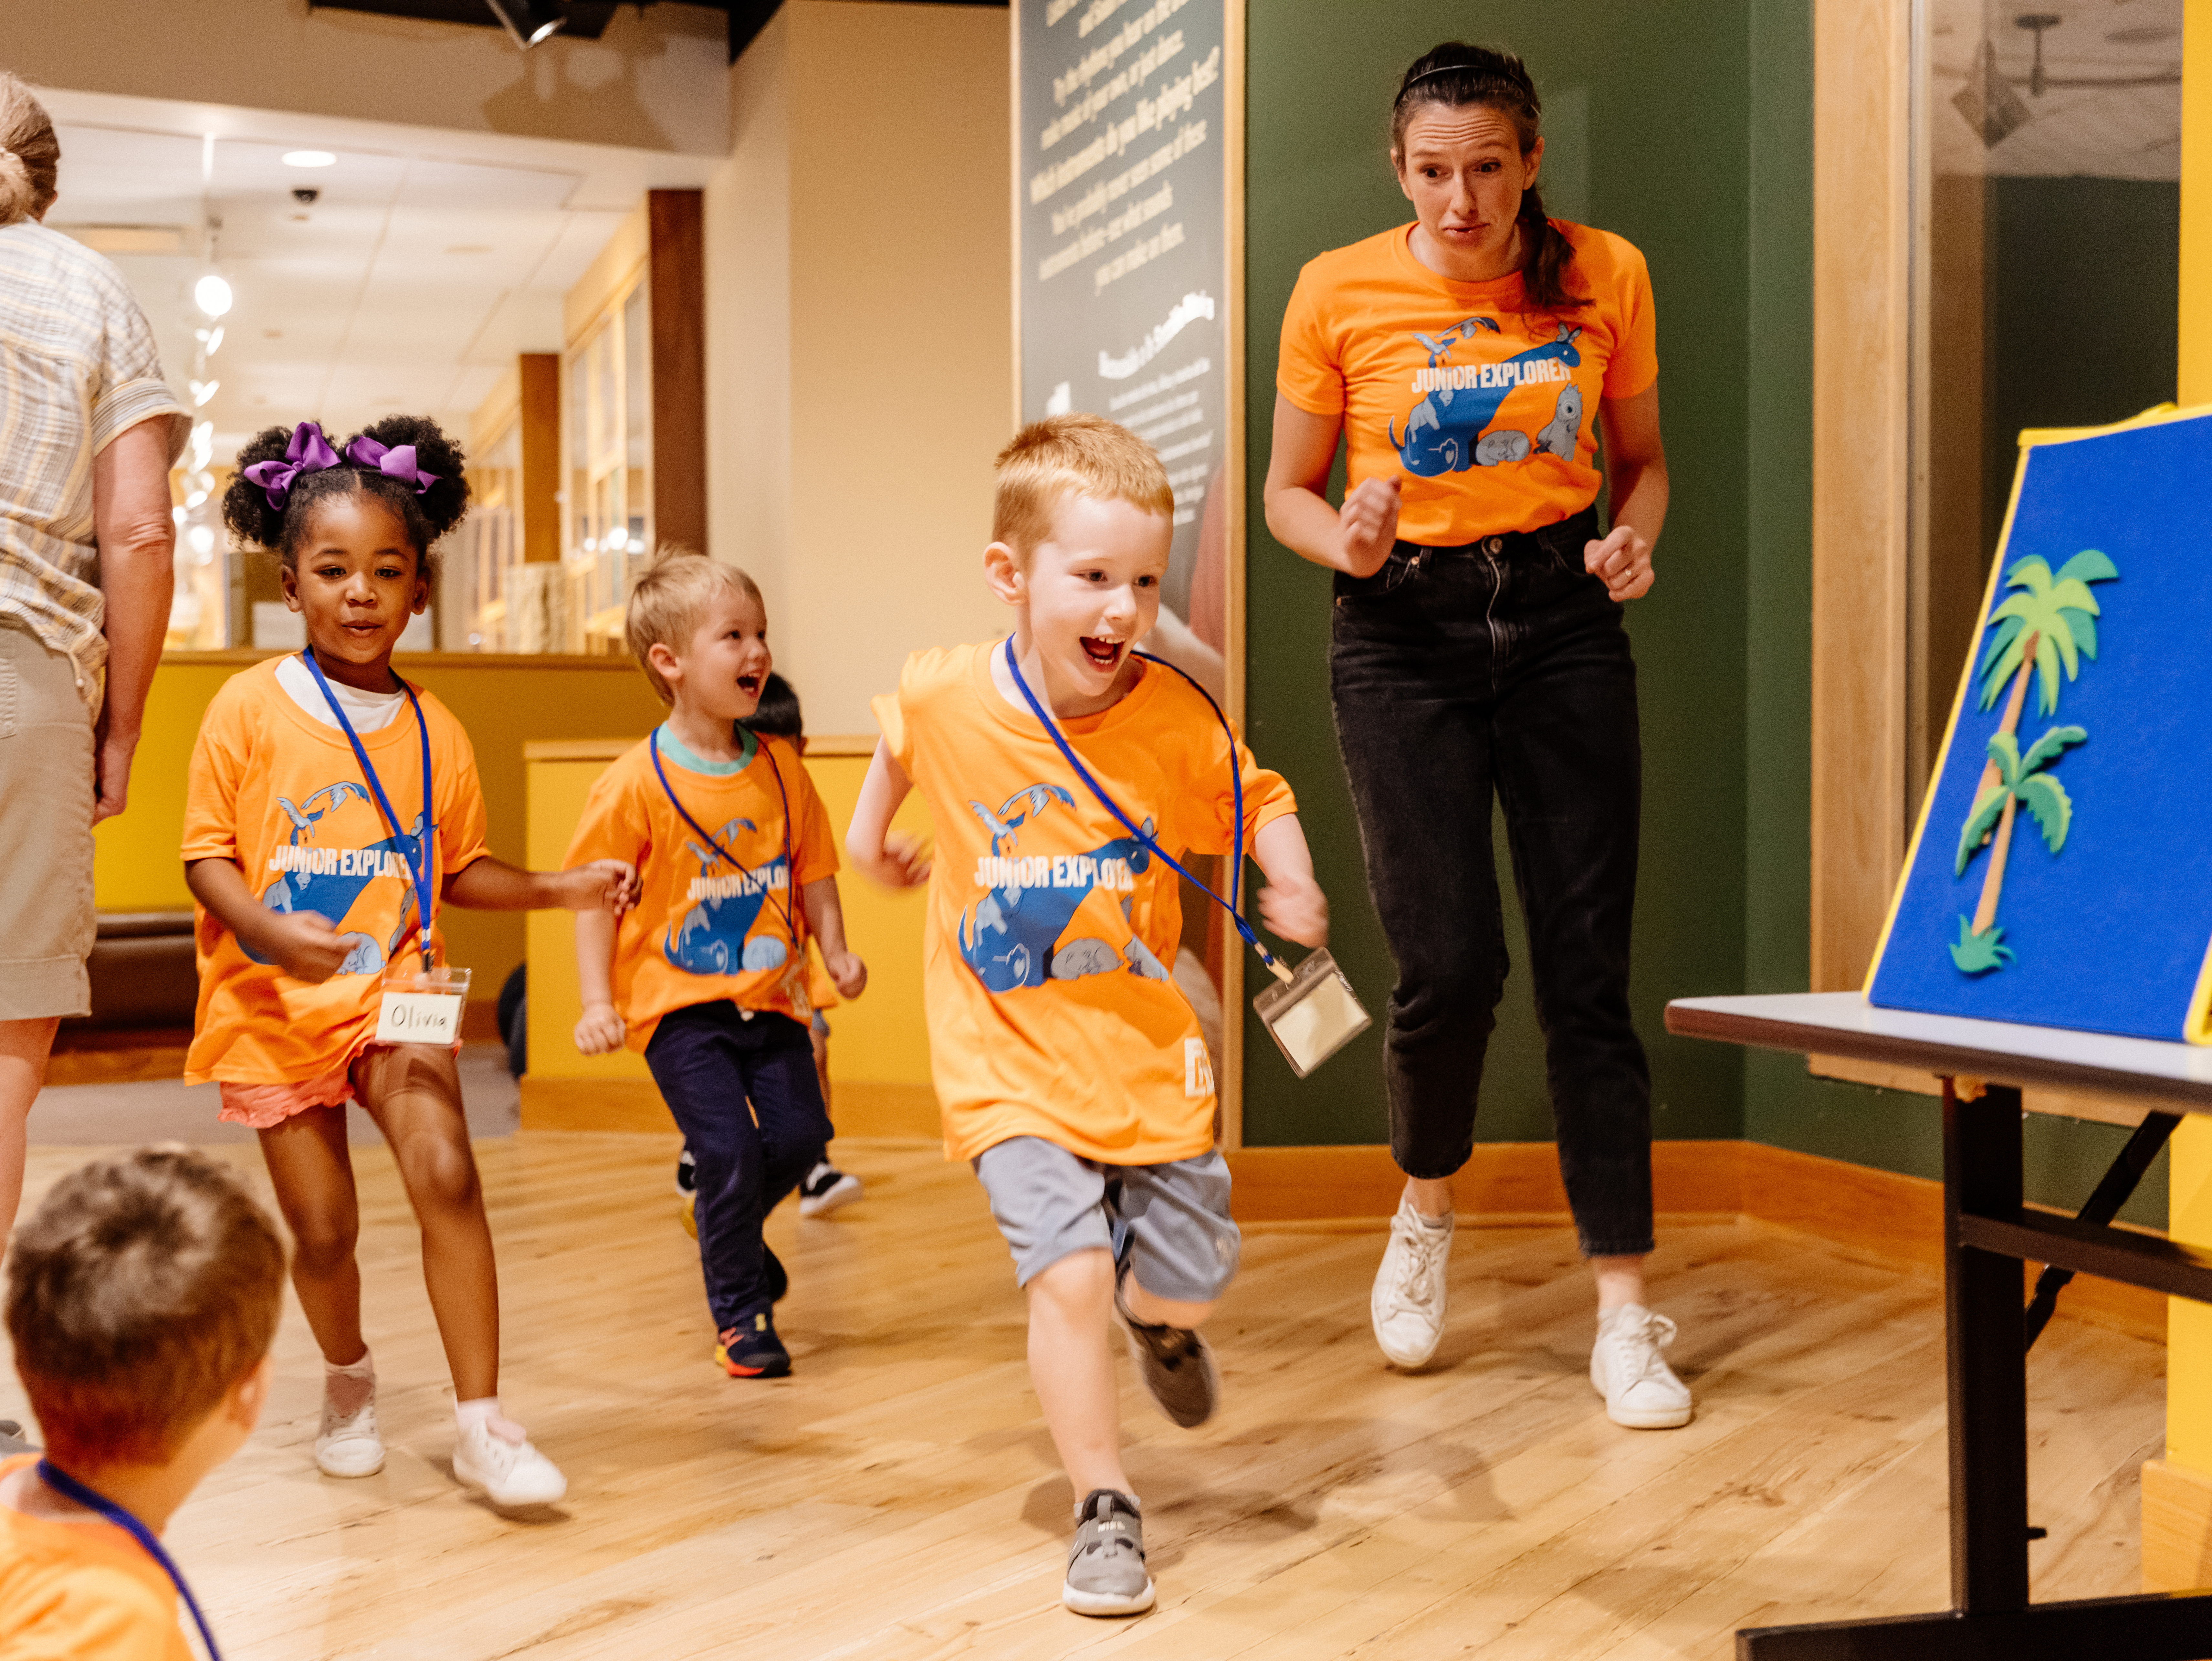 children and a adult walking playfully in the PlayLab; all are wearing matching orange shirts